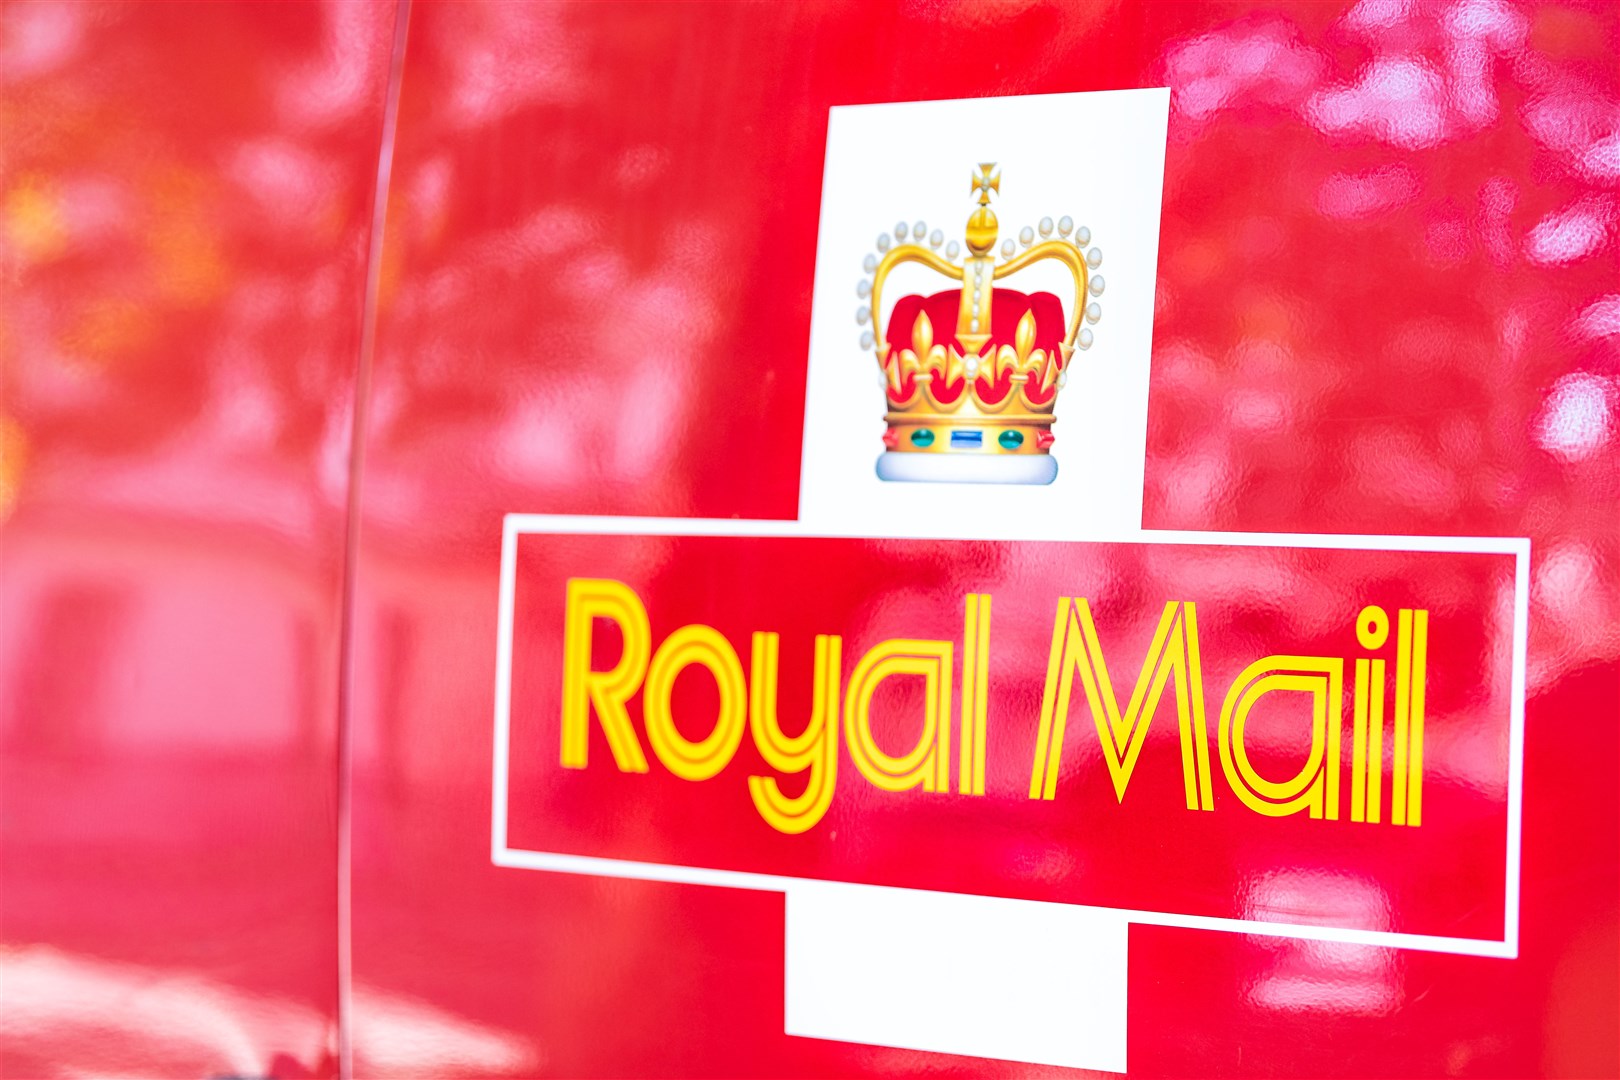 Royal Mail deliveries in the Highlands have been the subject of controversy, with fed-up residents complaining of long delays.